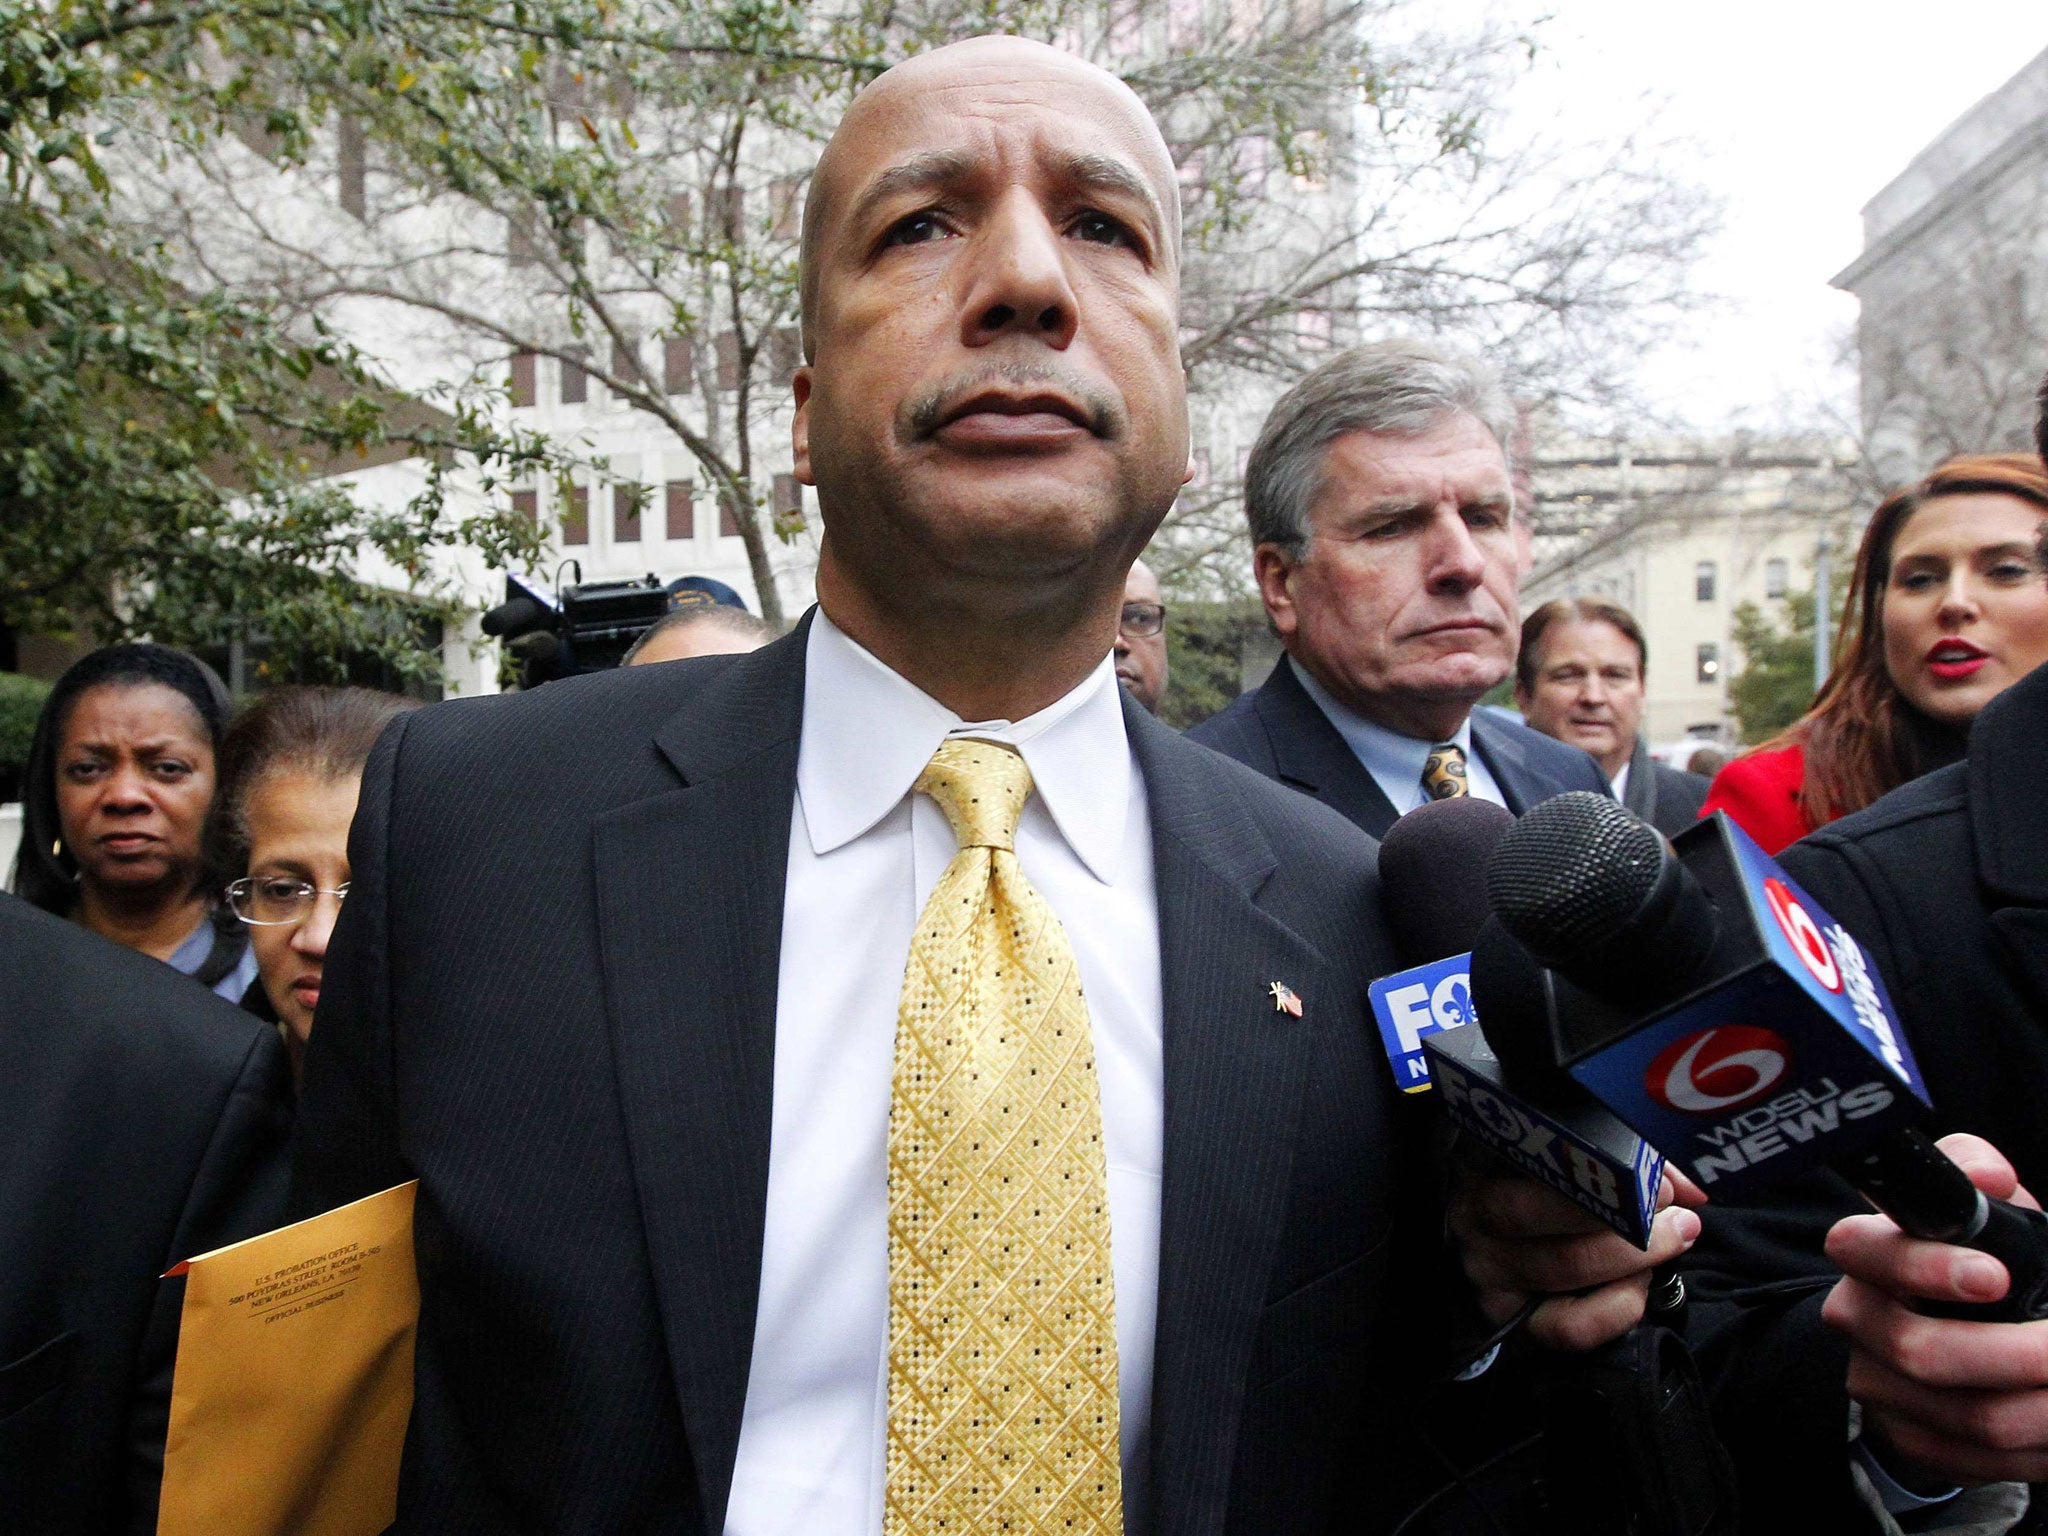 Former New Orleans Mayor C. Ray Nagin leaves the courthouse after being found guilty on graft charges in New Orleans